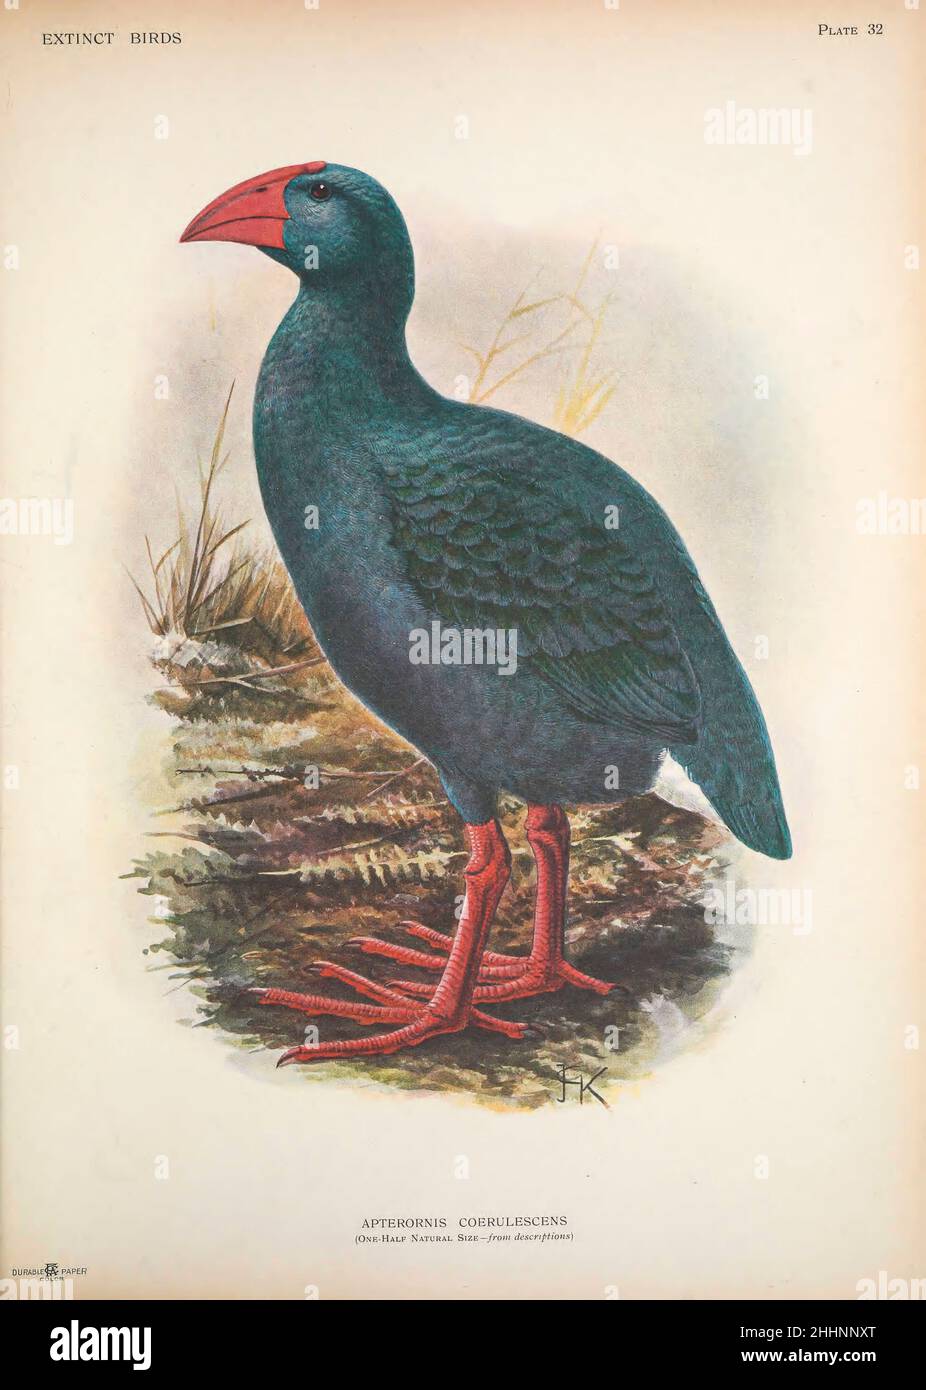 The Réunion swamphen (Porphyrio caerulescens syn Apterornis coerulescens), also known as the Réunion gallinule or oiseau bleu (French for 'blue bird'), is a hypothetical extinct species of rail that was endemic to the Mascarene island of Réunion. While only known from 17th and 18th century accounts by visitors to the island, it was scientifically named in 1848, based on the 1674 account by Sieur Dubois. A considerable literature was subsequently devoted to its possible affinities, with current researchers agreeing it was derived from the swamphen genus Porphyrio. It has been considered mysteri Stock Photo